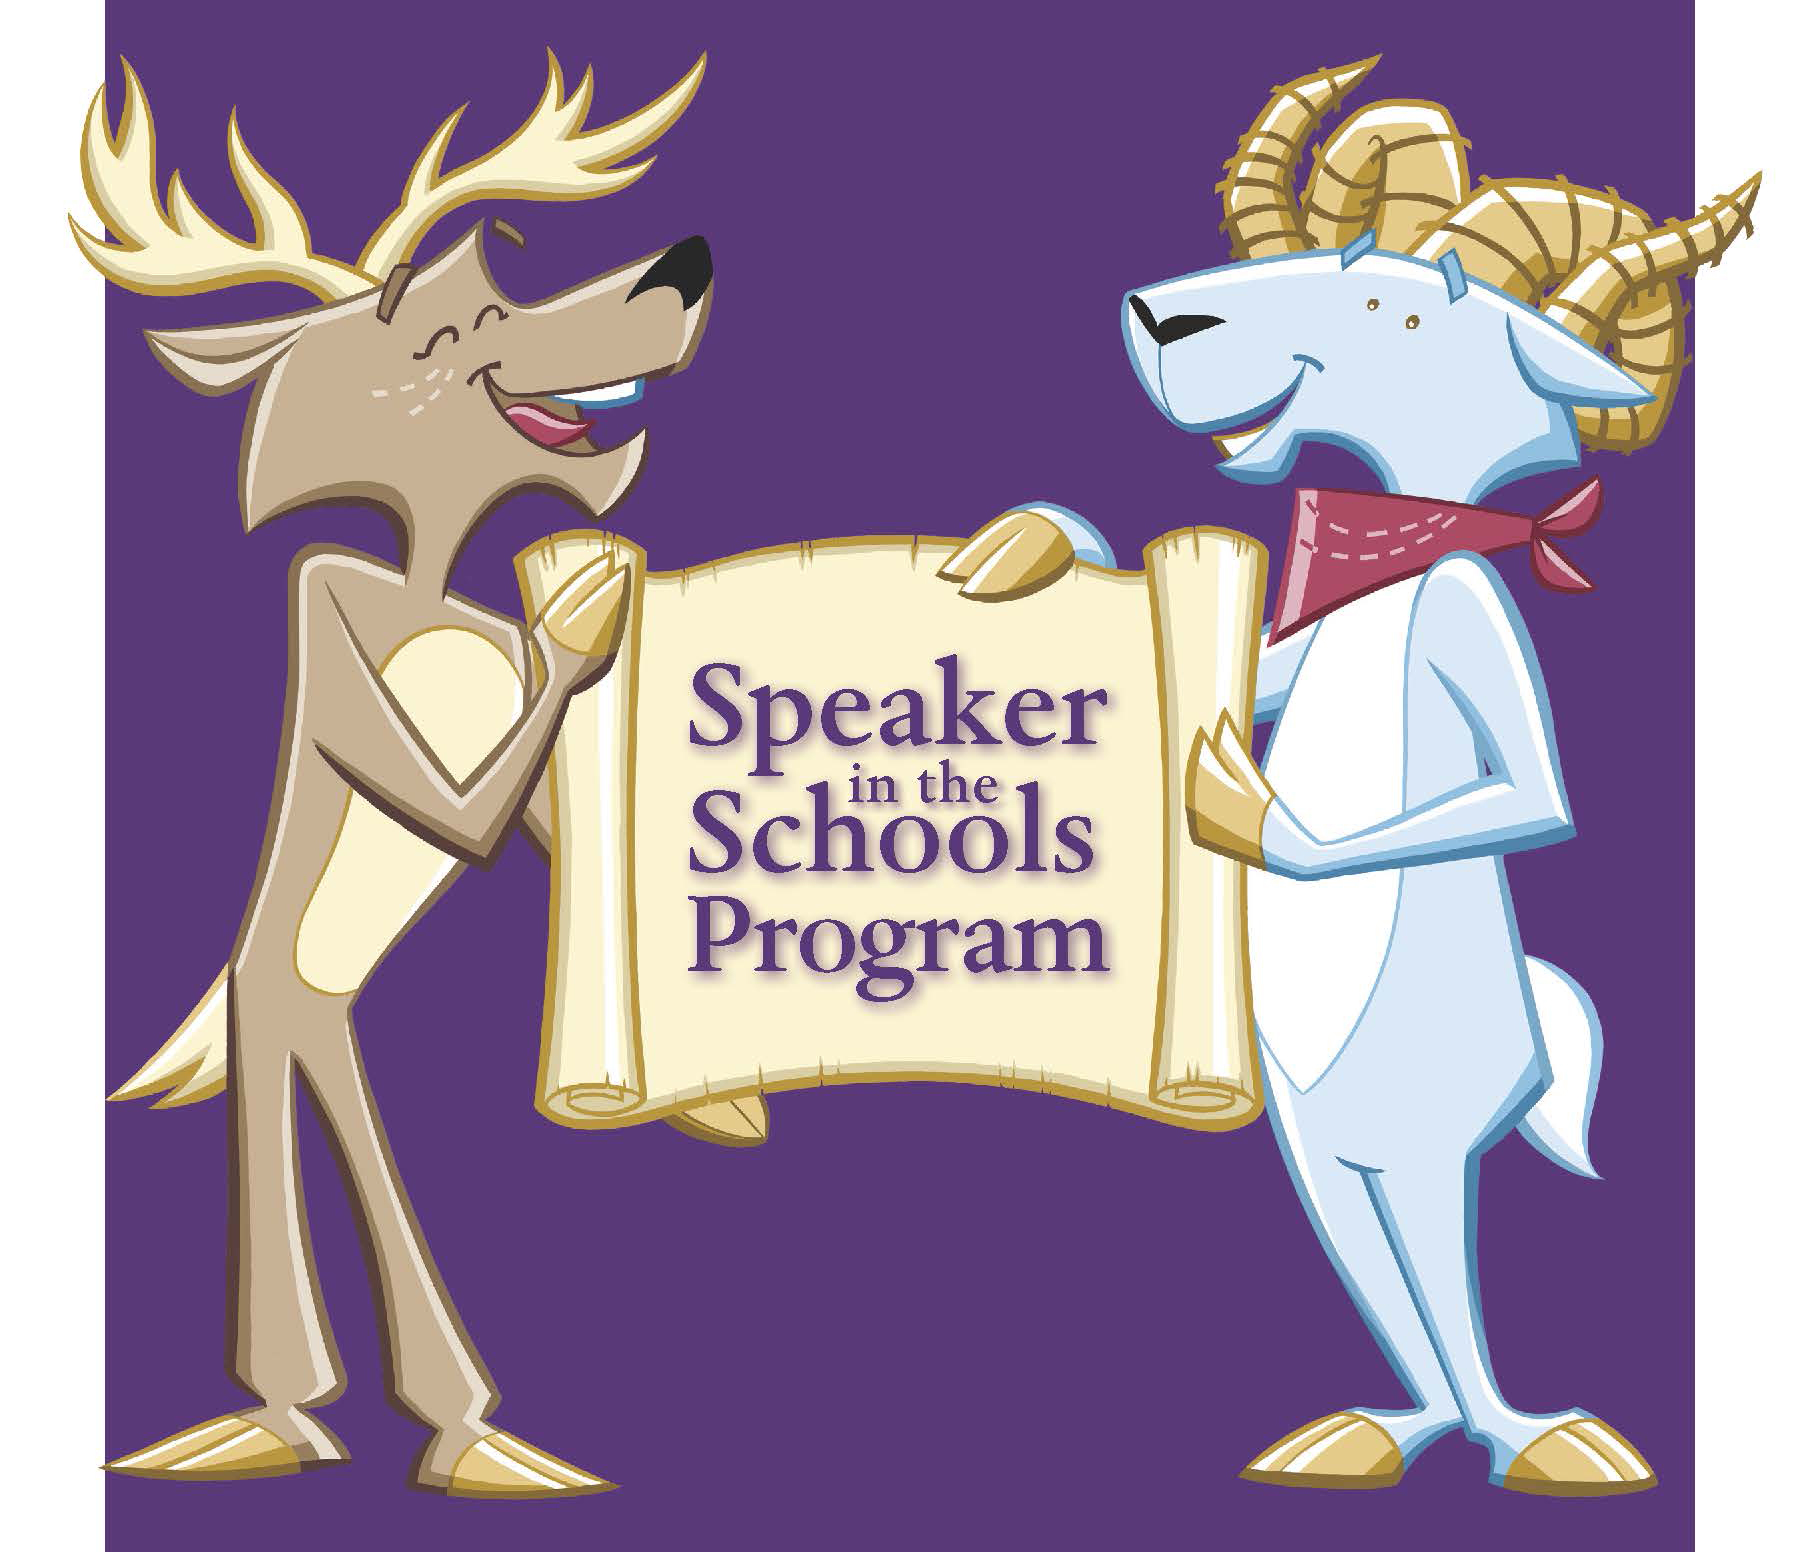 Two cartoon characters (a caribou and a ram) holding a sign that says Speaker in the Schools